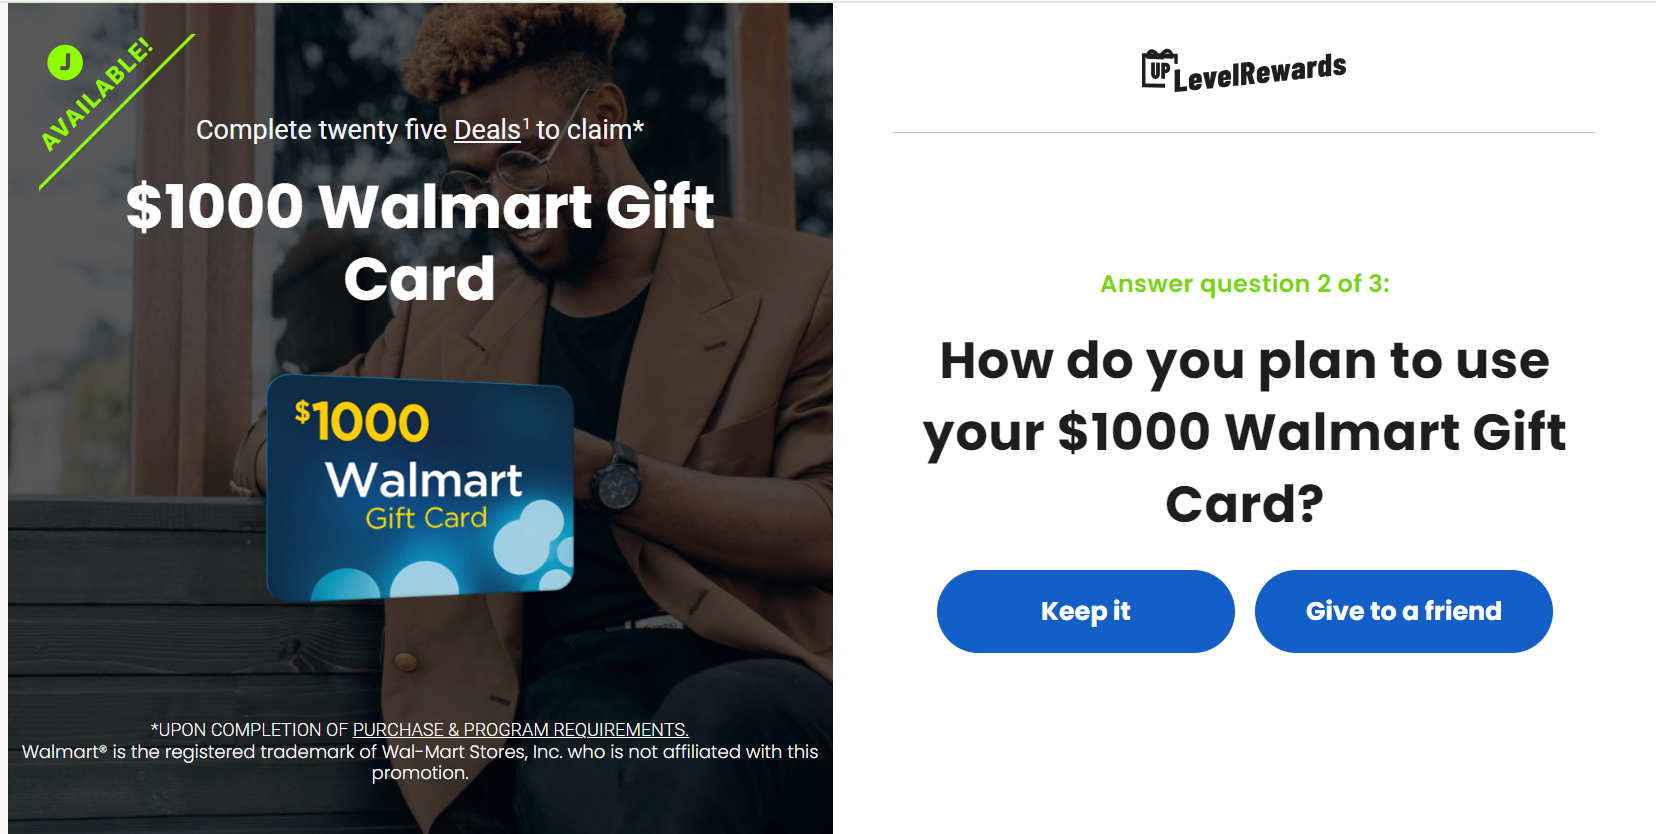 Paypal gift card giveaway, Paypal gift card wiveway usa, Paypal gift card giveaway in the usa, PayPal gift Cards, Get $1000 Paypal Gift card, Best Gift card giveaway, Best gift card in usa, How Do You Get PayPal $1000 Gift Card, Free $1000 PayPal Gift Card, Get a free a PayPal $100, How to get a Free $1000 Paypal Gift Card in usa, Is Paypal Giving Away $1000 Gift Card Rewards by Email?, What is the $1000 PayPal Gift Card Giveaway?, Benefits of PayPal Gift Cards, Get a $1000 Paypal gift Card Now, Tips to Increase Your Chances of Winning Paypal gift Card, Promotional Strategies for PayPal Gift Card Giveaway, Get a $1000 PayPal Gift Card Post-Giveaway, Usa money card, 